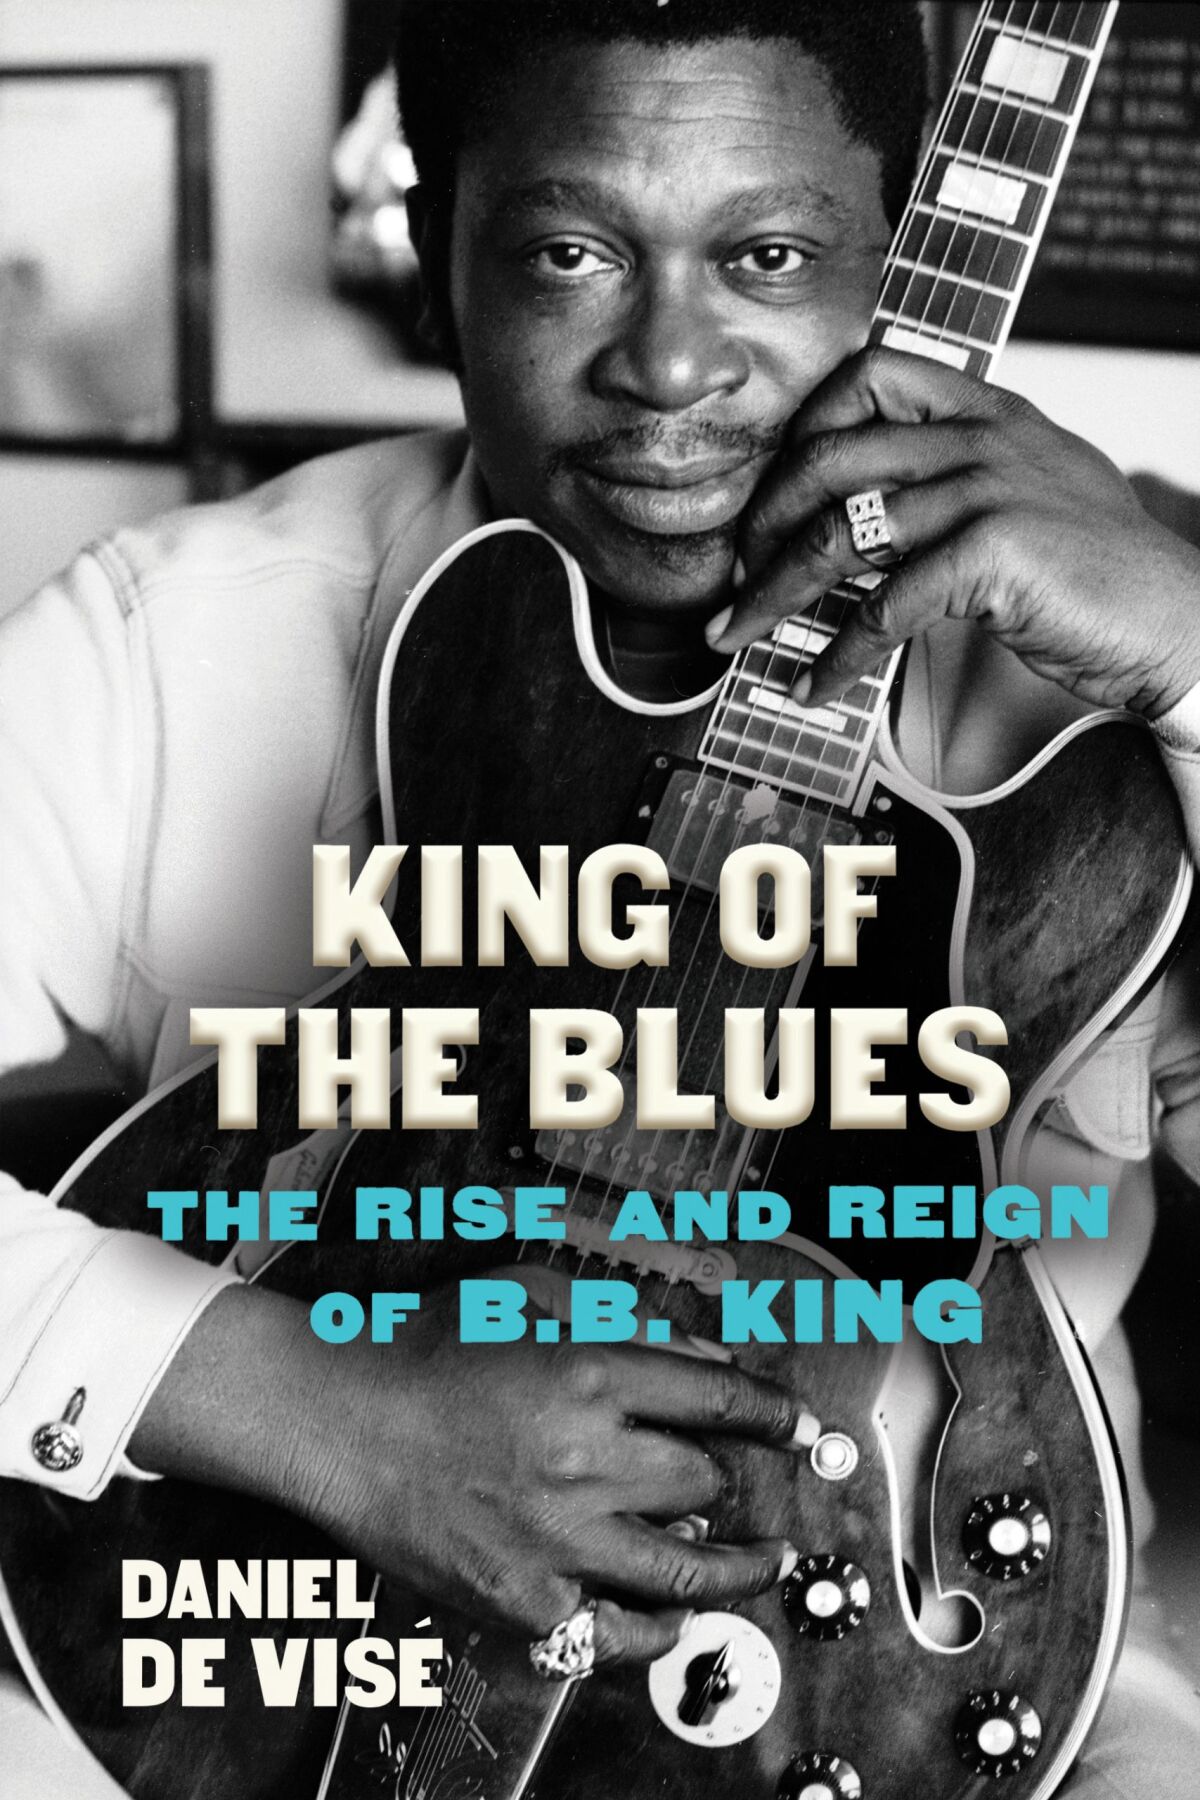 "King of the Blues: The Rise and Reign of B.B. King"